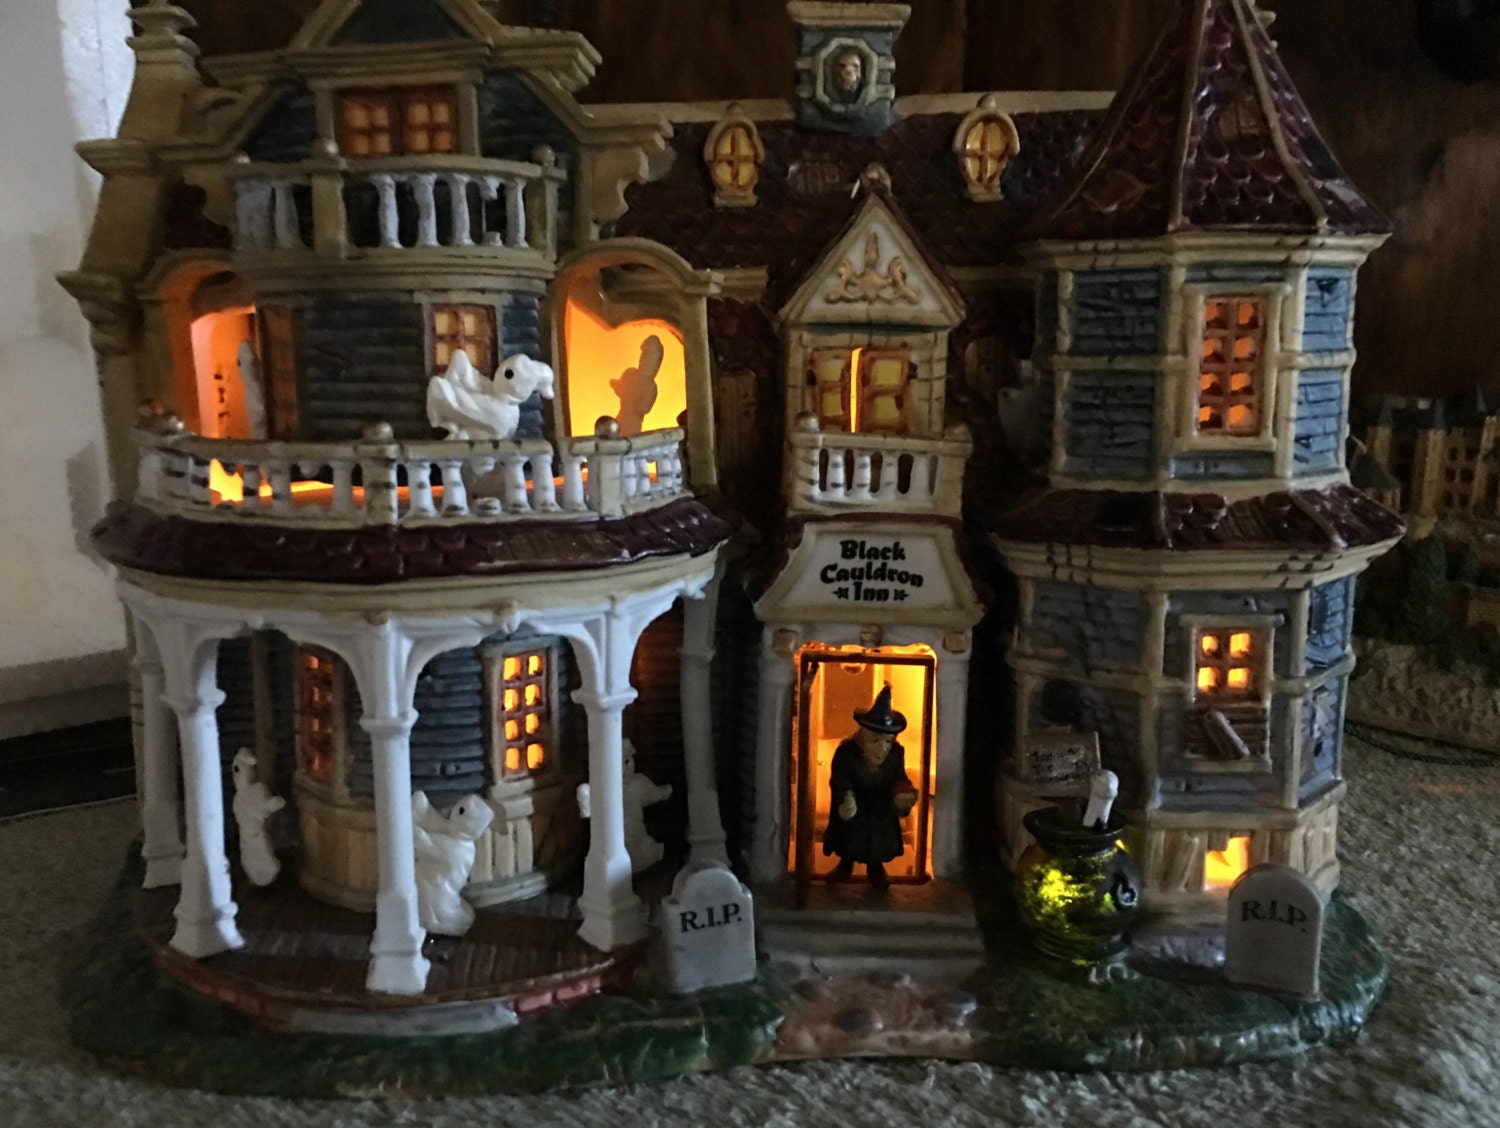 Lemax Spooky Town Collection. Black Cauldron Inn by coinspot